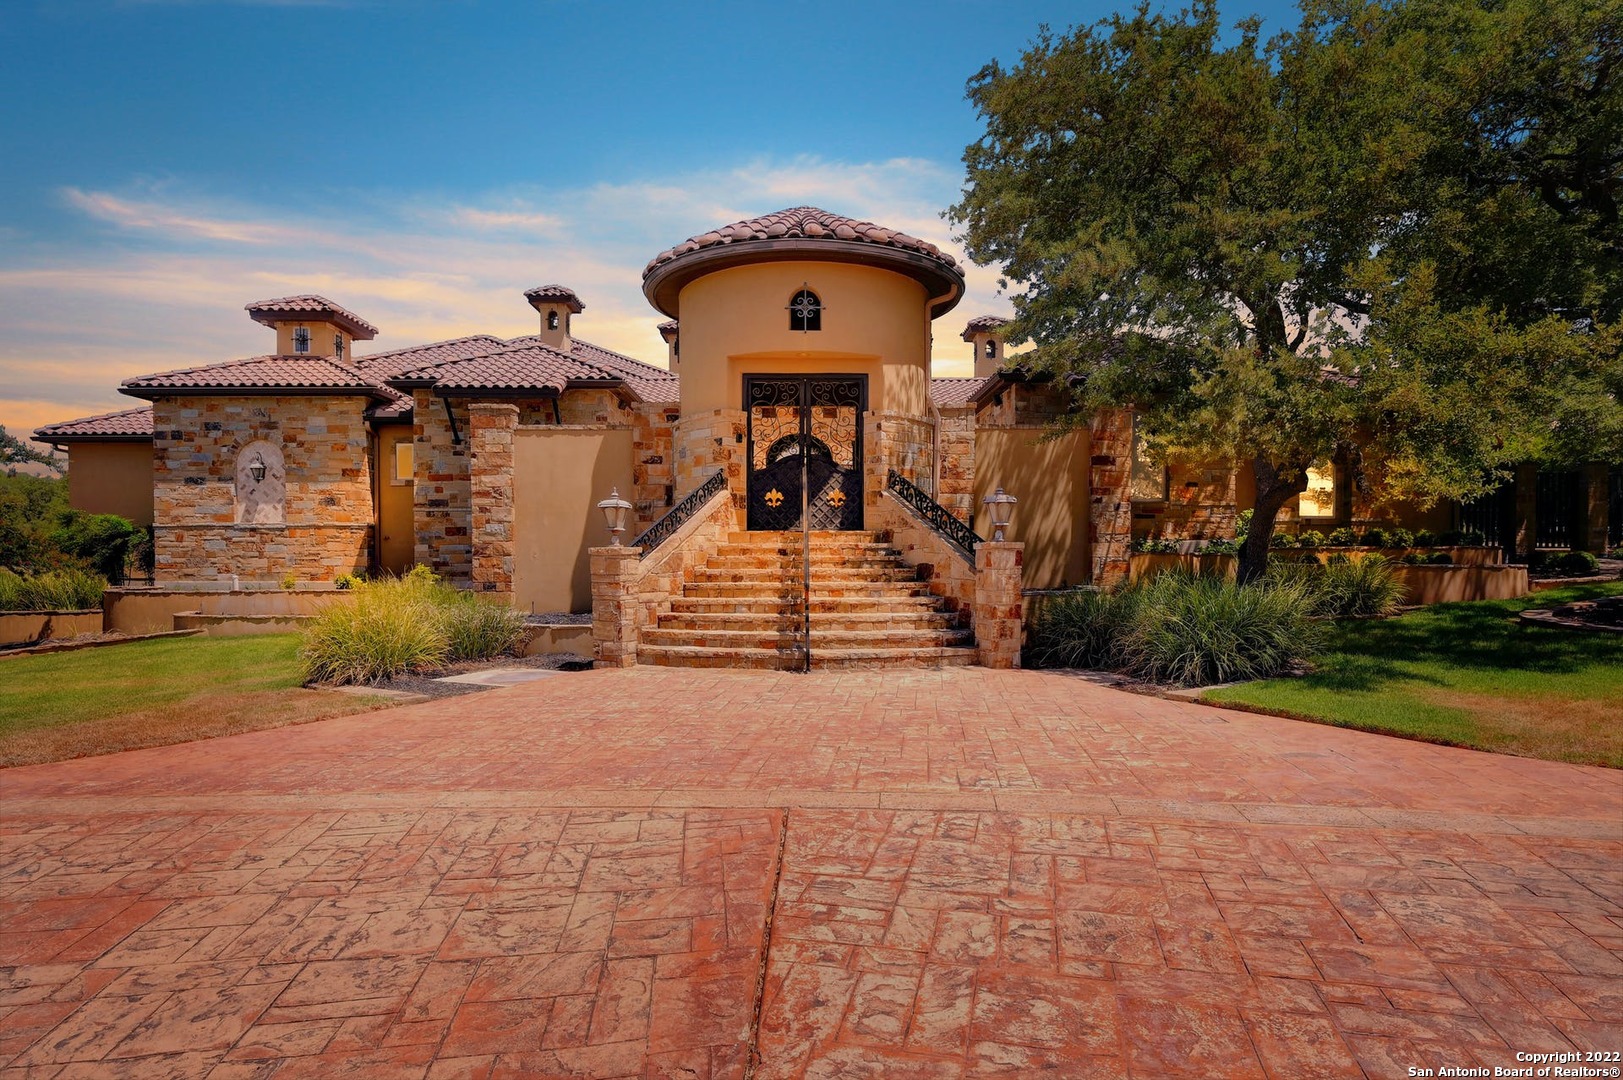 Over 9000 sqft of immaculate Hill Country real estate sitting on 2+ acres. Entering through a Spanish-style courtyard, you will be amazed by the grand entry, marble mosaics, mesquite wood flooring, high ceilings, and Venetian plaster throughout this home. On the main floor, you will find 3 bedrooms including the owner's suite with a spa-like bath, theatre room, library, chef's kitchen, butler's kitchen, breakfast nook, living and dining area, wine room, multiple office spaces, elevator, and a safe room. Upstairs are two additional bedrooms with a Jack n' Jill bath, and a separate entertaining area with a custom bar. A hill country oasis located in the backyard with an oversized covered patio, outdoor kitchen, fireplace, heated pool, hot tub, and relaxing waterfall, with a 2/1 casita that has all living necessities within it. This gorgeous home offers a tranquil living experience, where your home becomes your estate, and is a must-see in person to truly appreciate all the details that have gone into the custom design of this home.